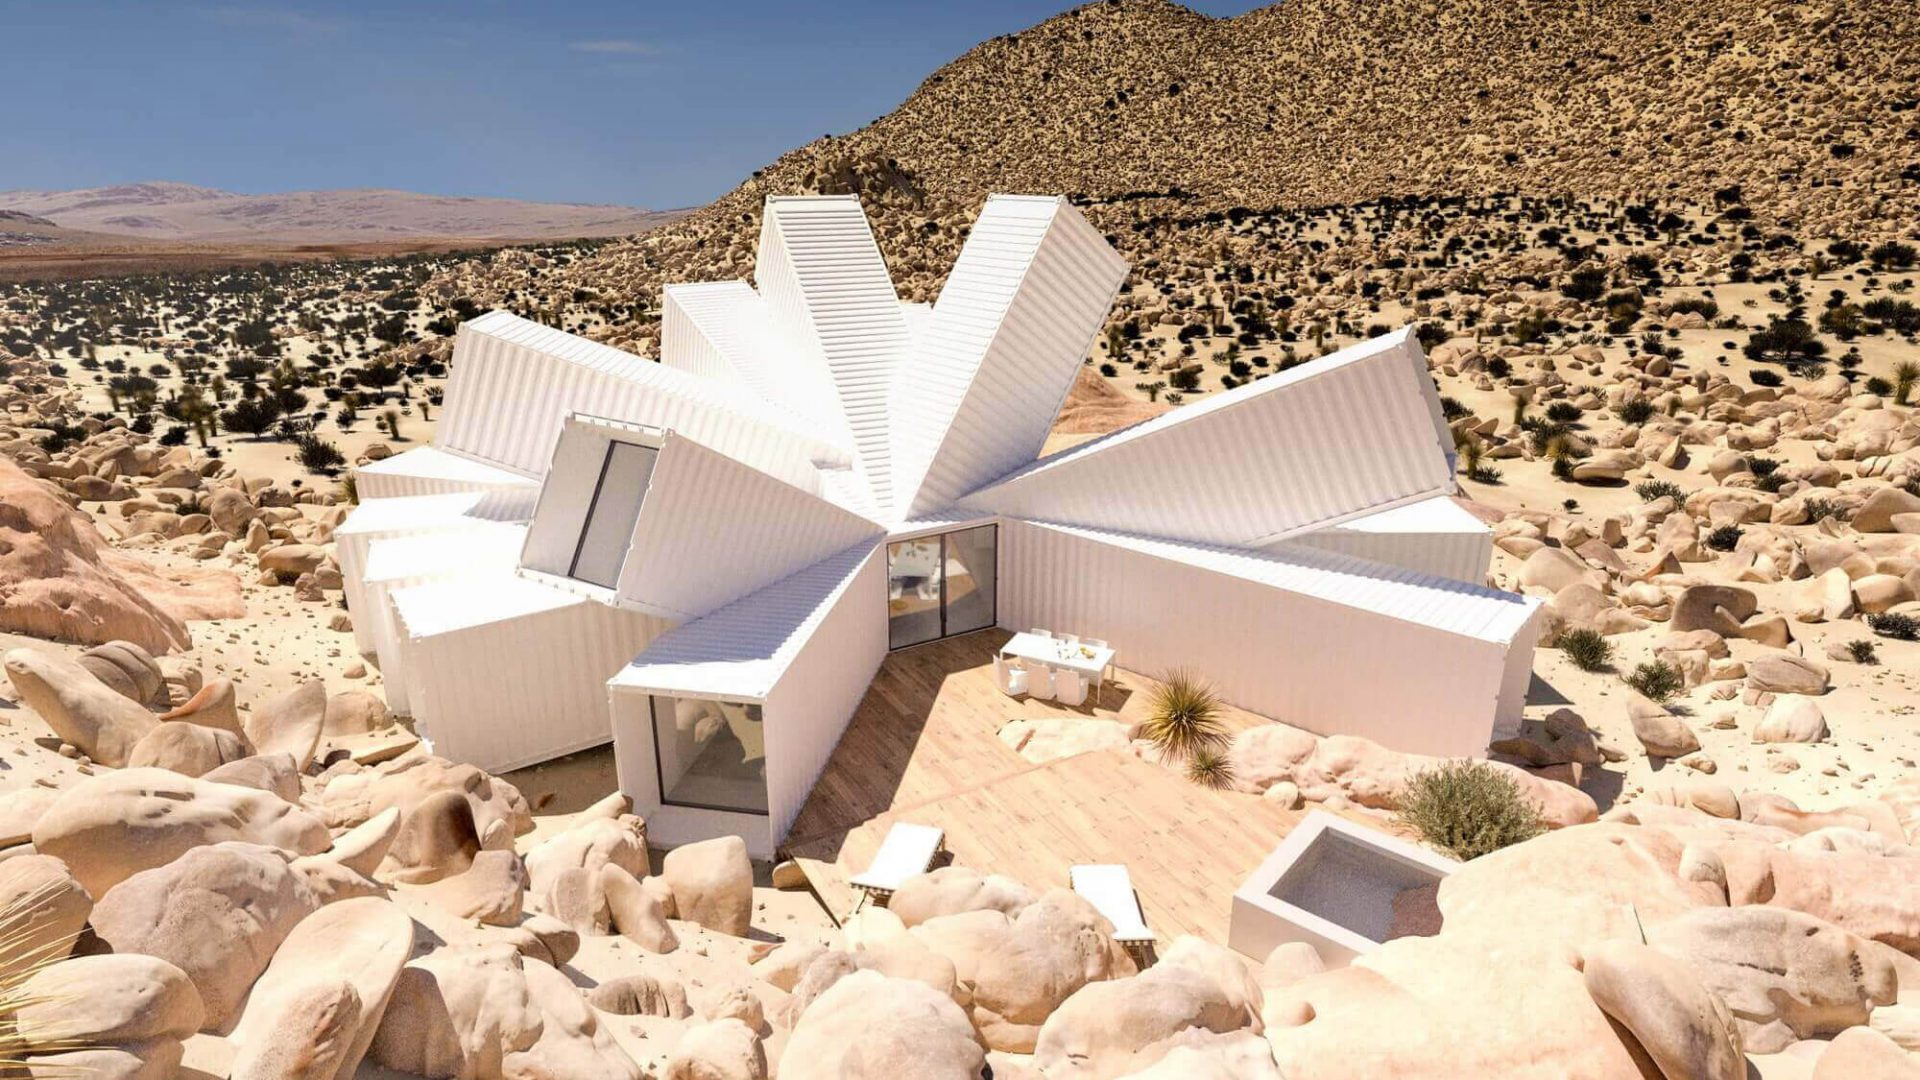 Joshua tree residence by Whitaker Studio, made with shipping containers